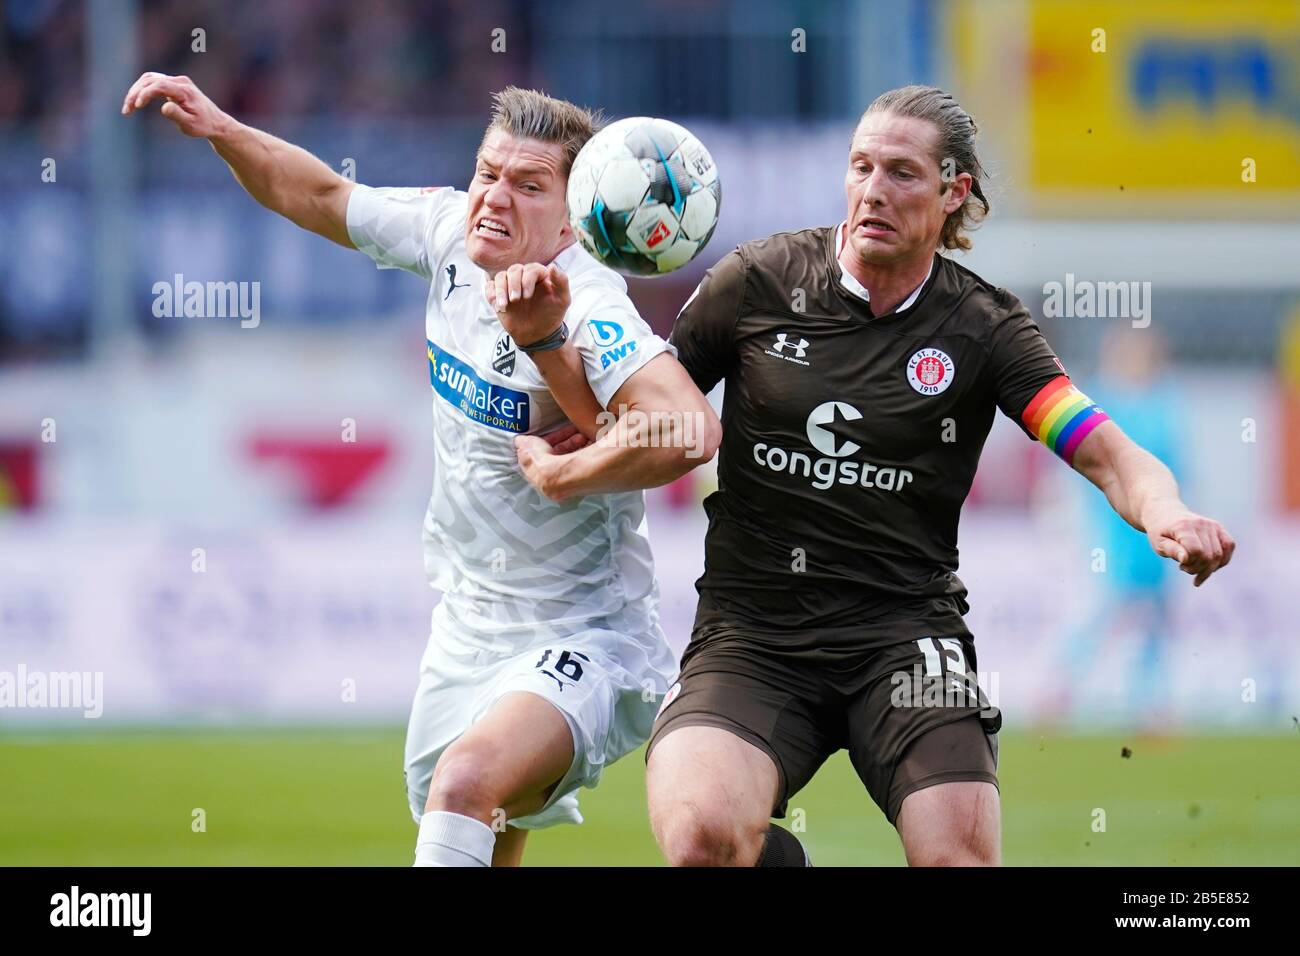 Sandhausen, Germany. 08th Mar, 2020. Football: 2nd Bundesliga, 25th matchday, SV Sandhausen - FC St. Pauli, Hardtwaldstadion. Sandhausen's Kevin Behrens (l) and St. Paulis Daniel Buballa fight for the ball. Credit: Uwe Anspach/dpa - IMPORTANT NOTE: In accordance with the regulations of the DFL Deutsche Fußball Liga and the DFB Deutscher Fußball-Bund, it is prohibited to exploit or have exploited in the stadium and/or from the game taken photographs in the form of sequence images and/or video-like photo series./dpa/Alamy Live News Stock Photo